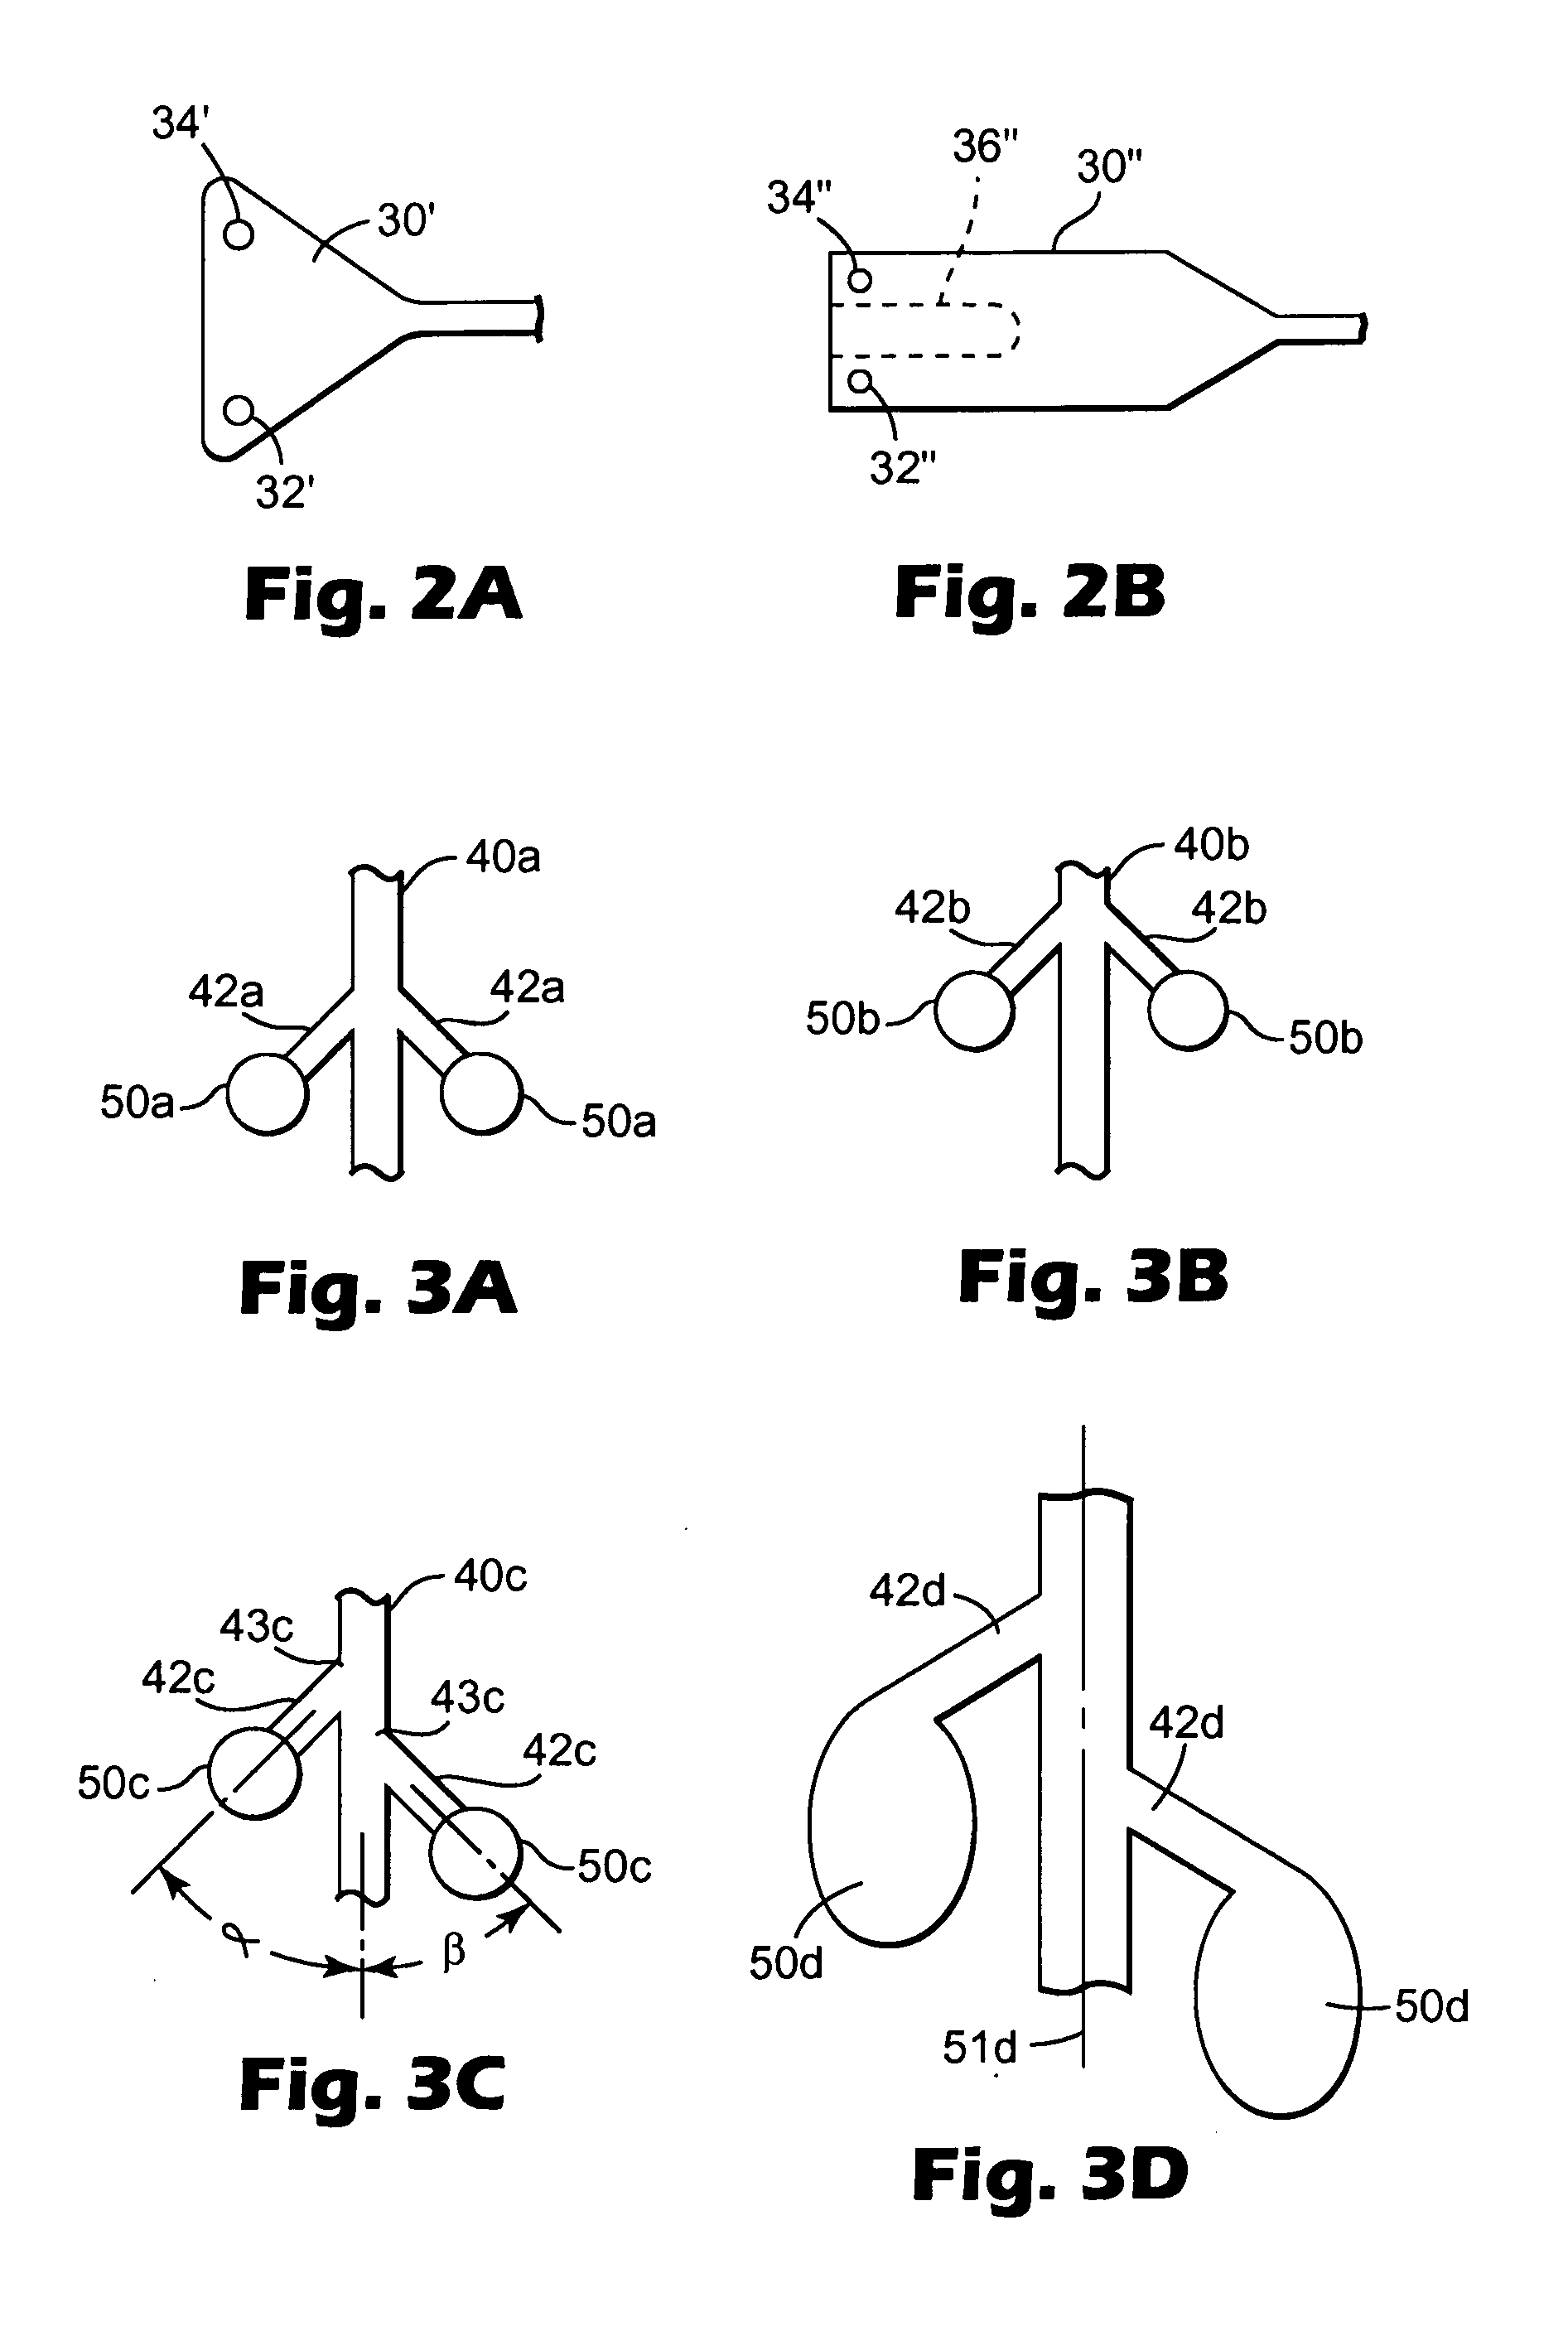 Sample processing devices